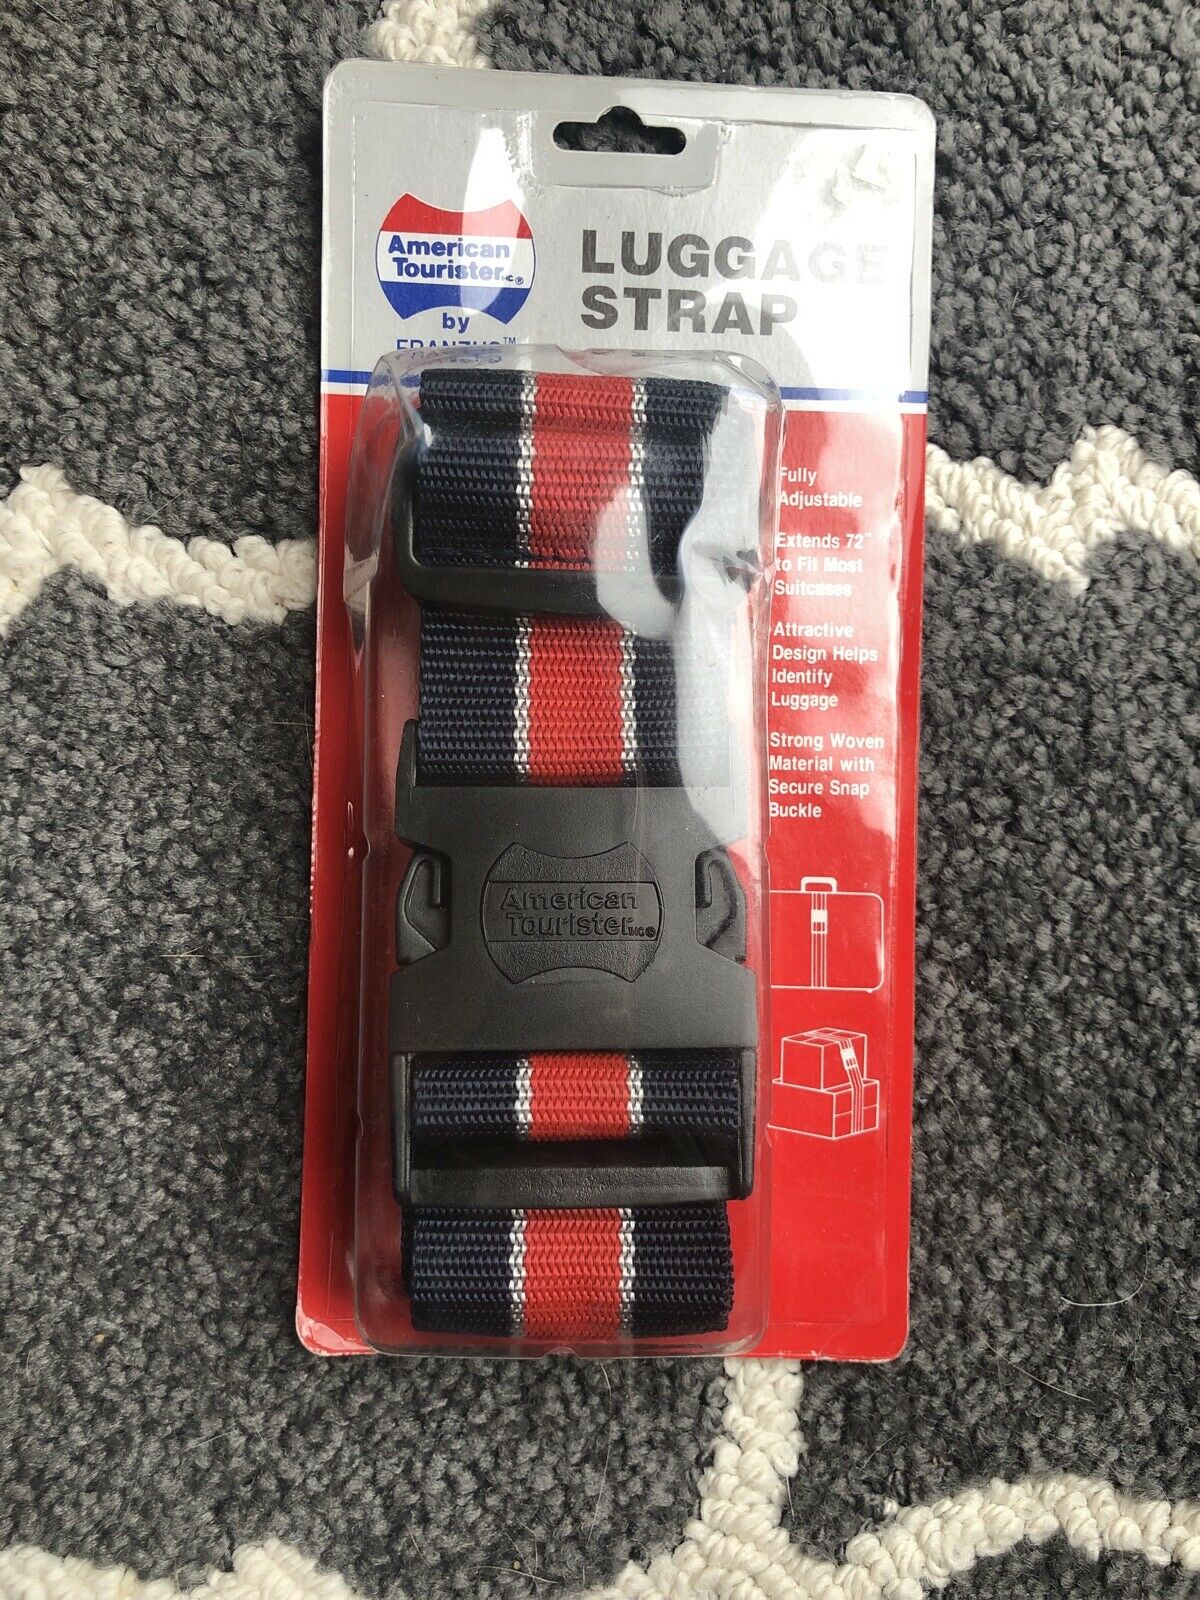 American Tourister  Red/white/blue Luggage Strap Travel Accessory New !